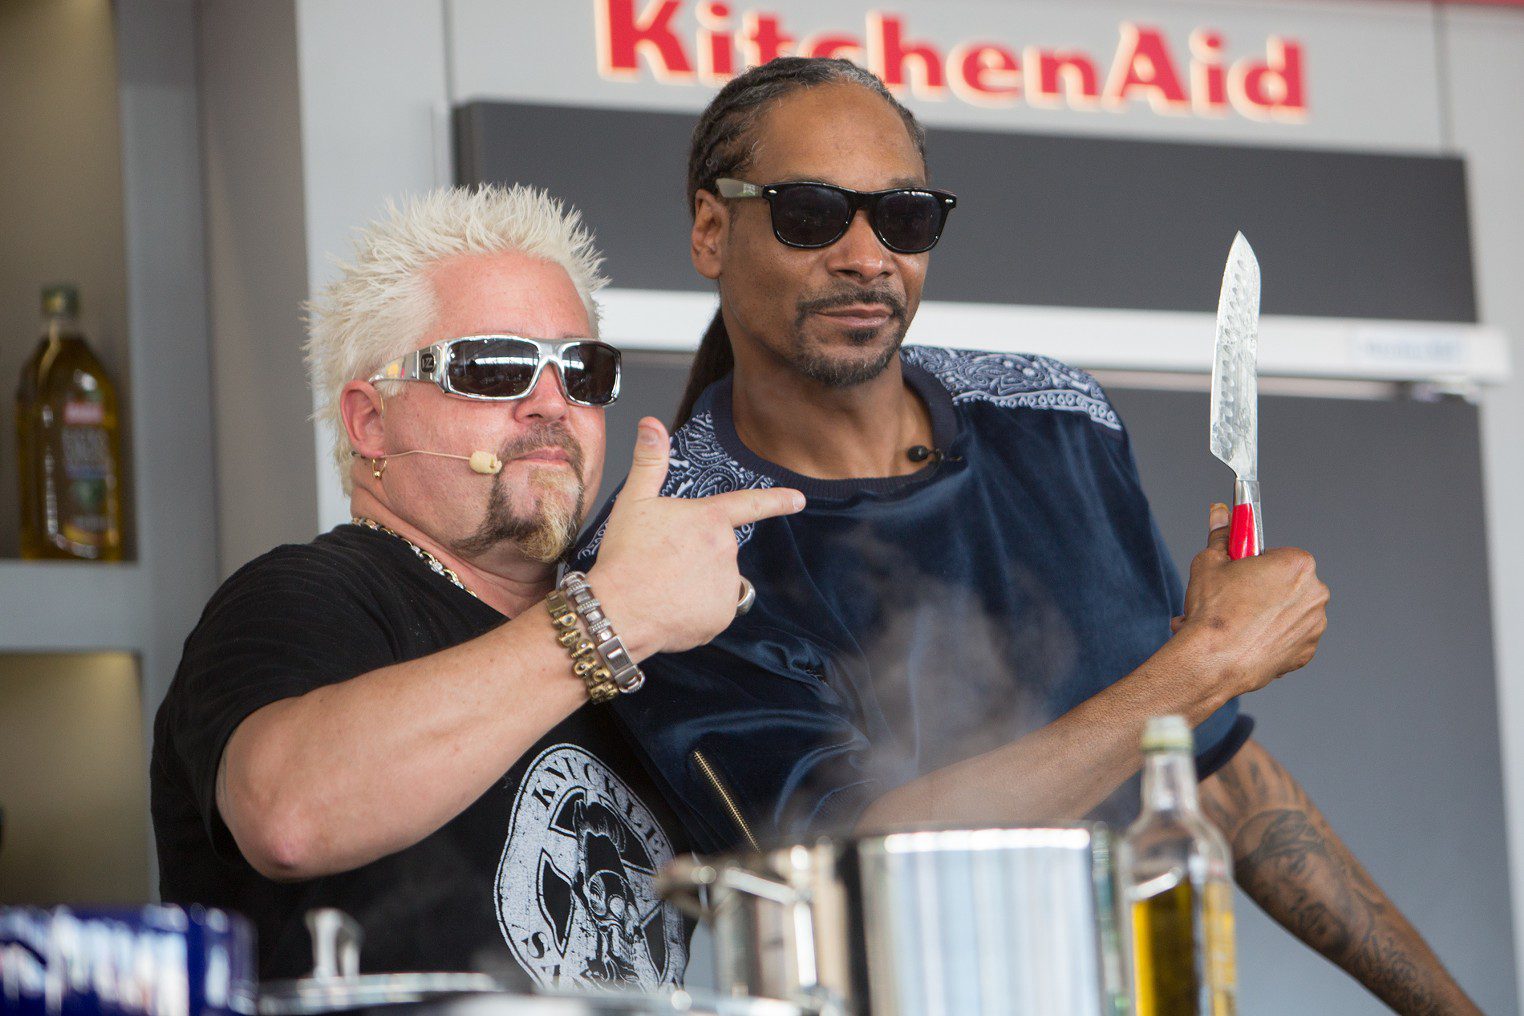 snoop dog and speaker at a21 culinary event